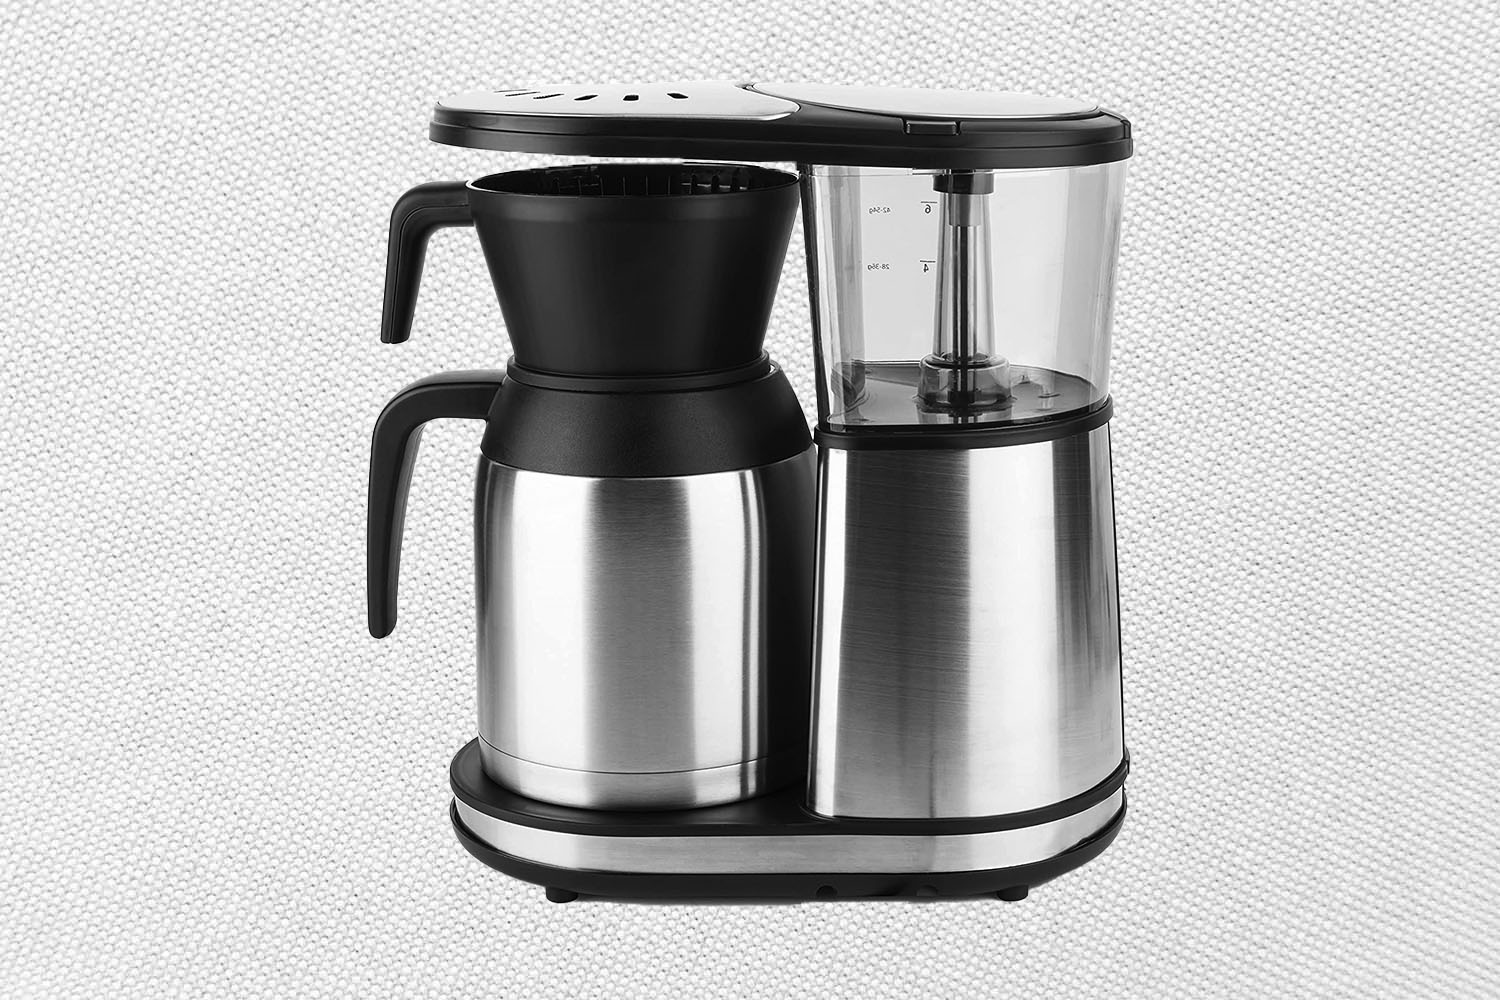 A Bonavita 8 Cup Coffee Maker on a white background.